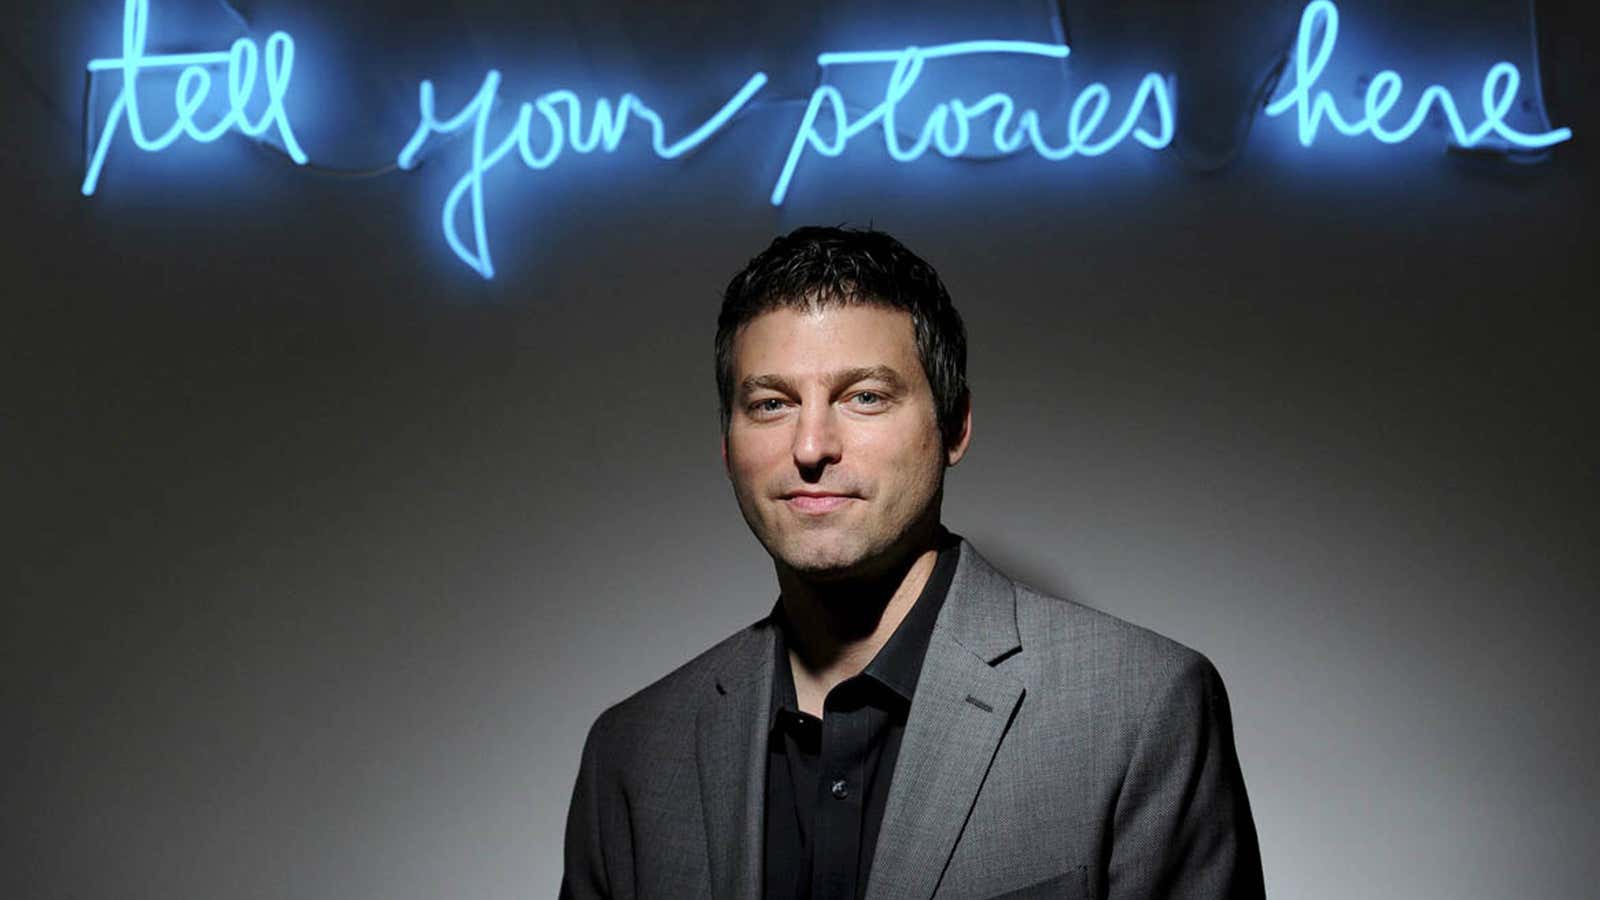 Adam Bain is leaving the company to do something new.